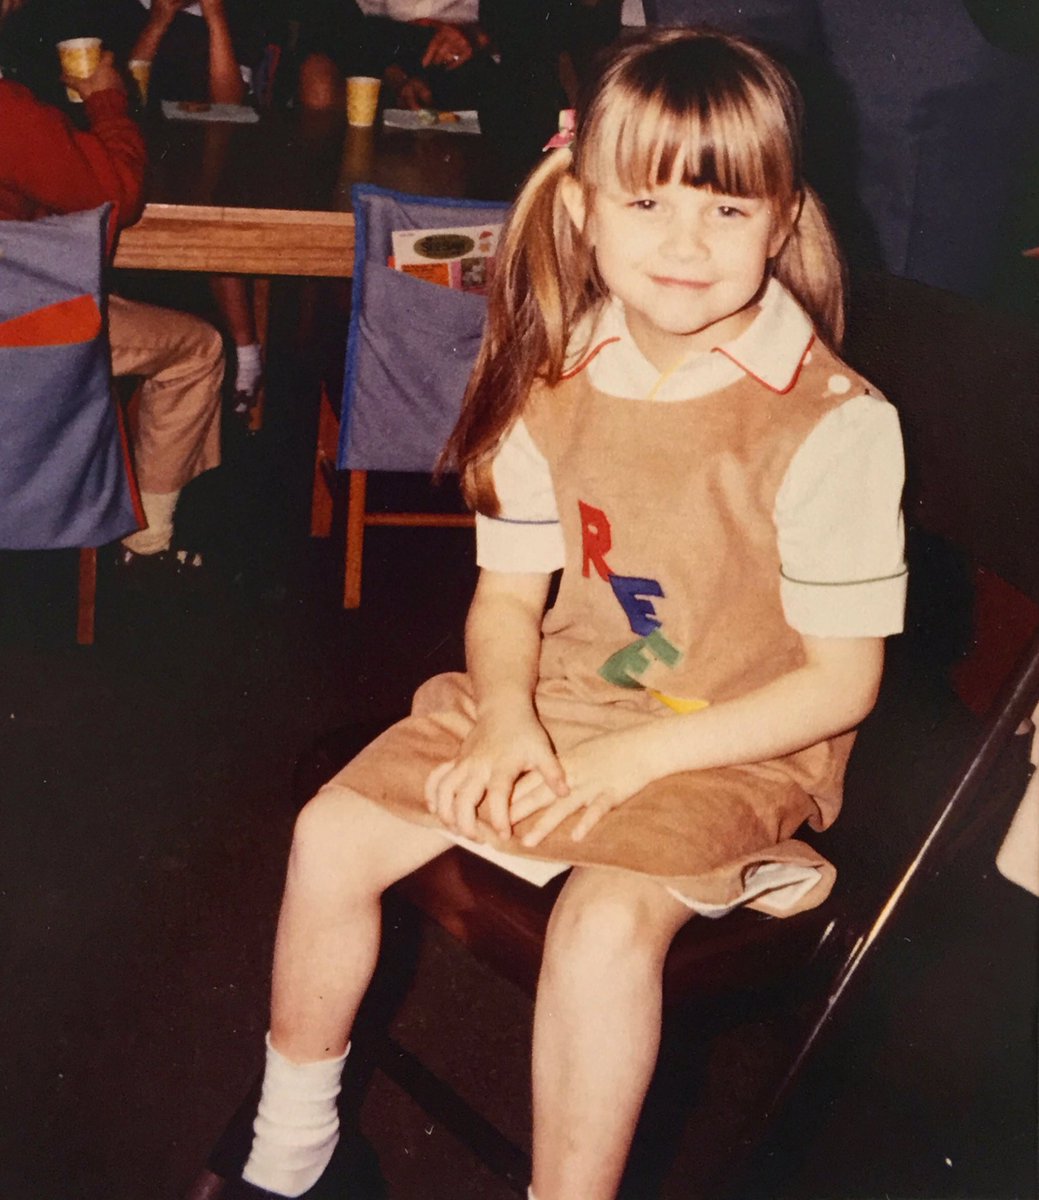 #TBT #BackToSchool vibes ???? (Yes, my dress has 'Reese' stitched on the front ... ????) https://t.co/zWfFrCtXma